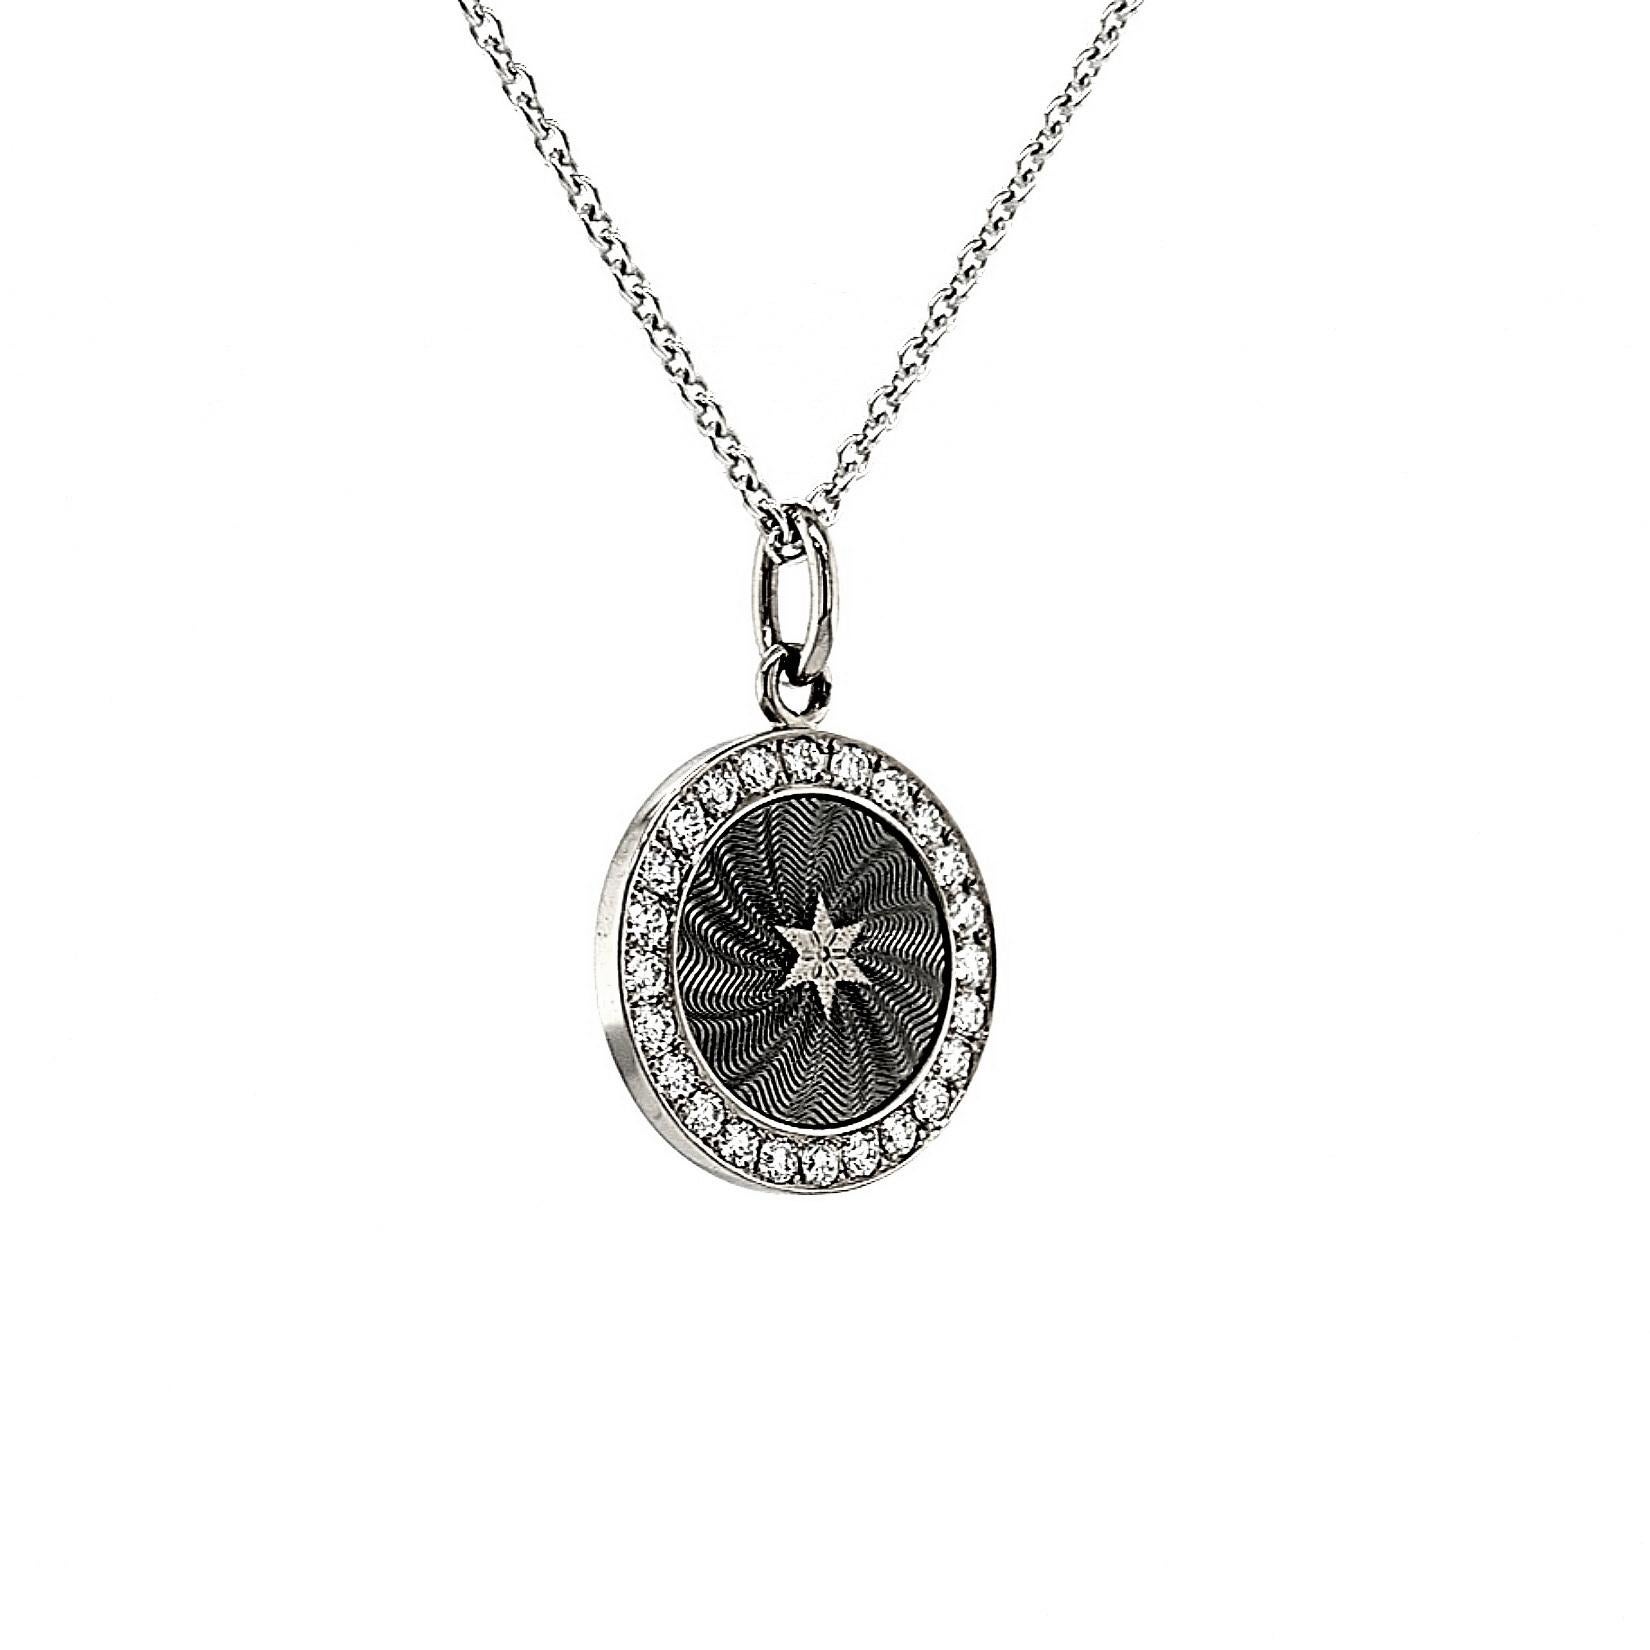 Round Disc Pendant with Star 18k White Gold Silver Enamel 24 Diamonds 0.36 ct For Sale 6